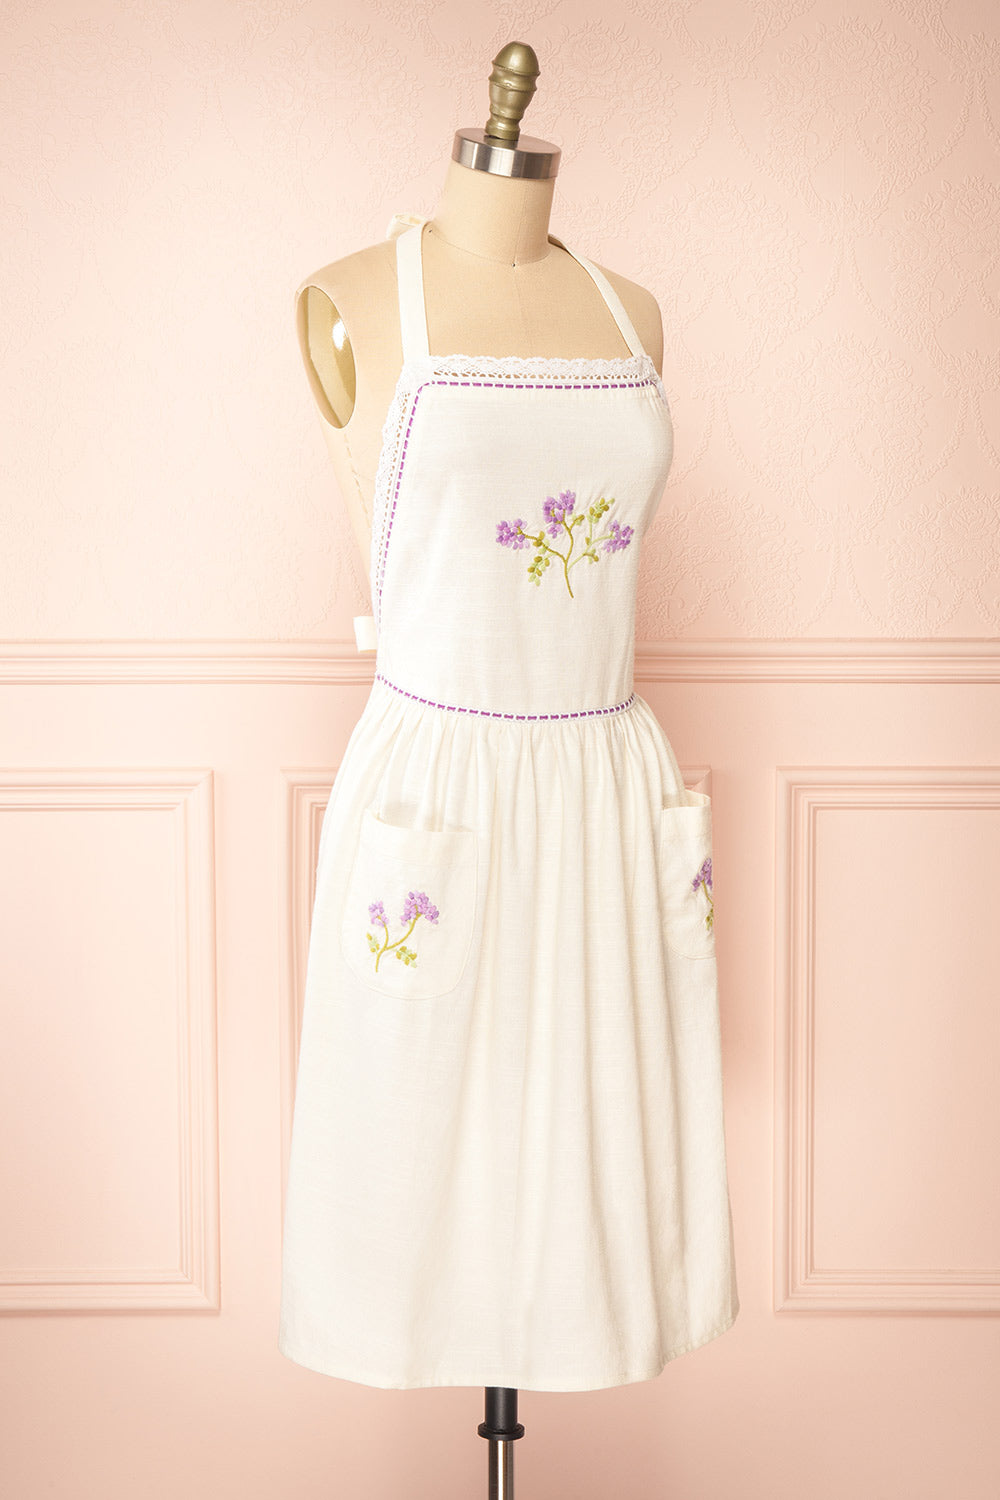 Cornwall White Apron with Embroidered Lavender | Boutique 1861 side view